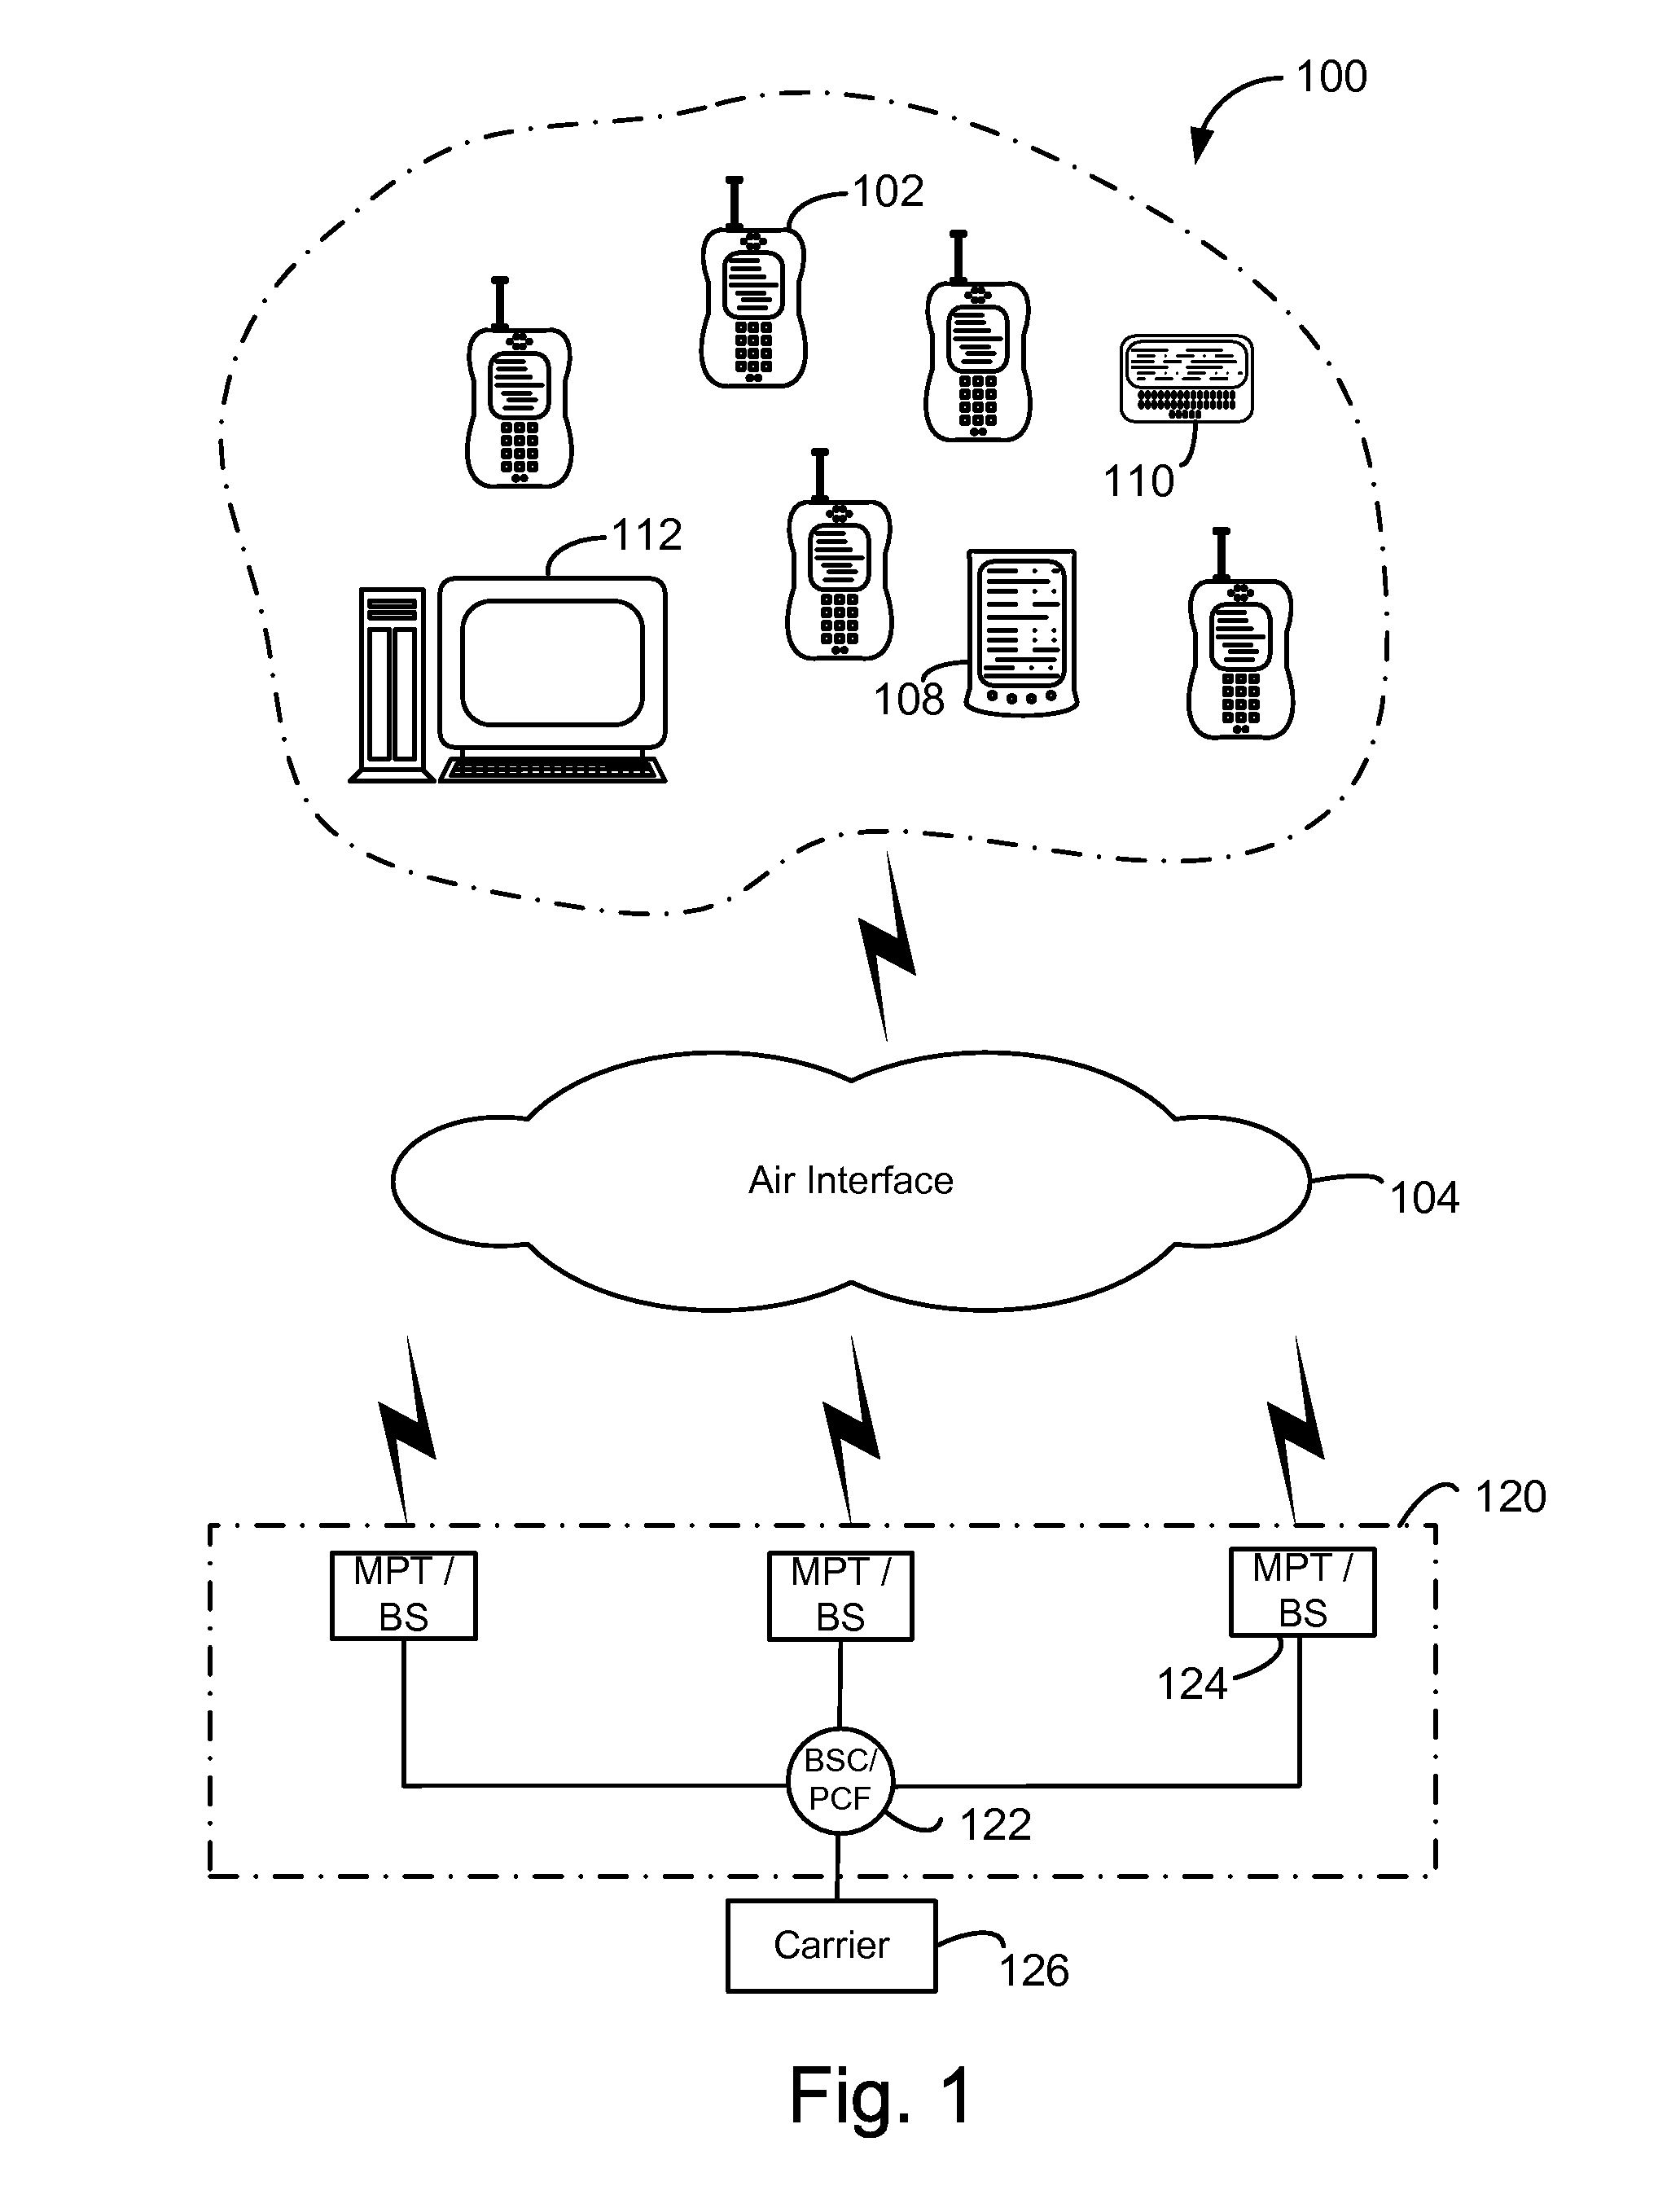 Mobility management of multiple clusters within a wireless communications network